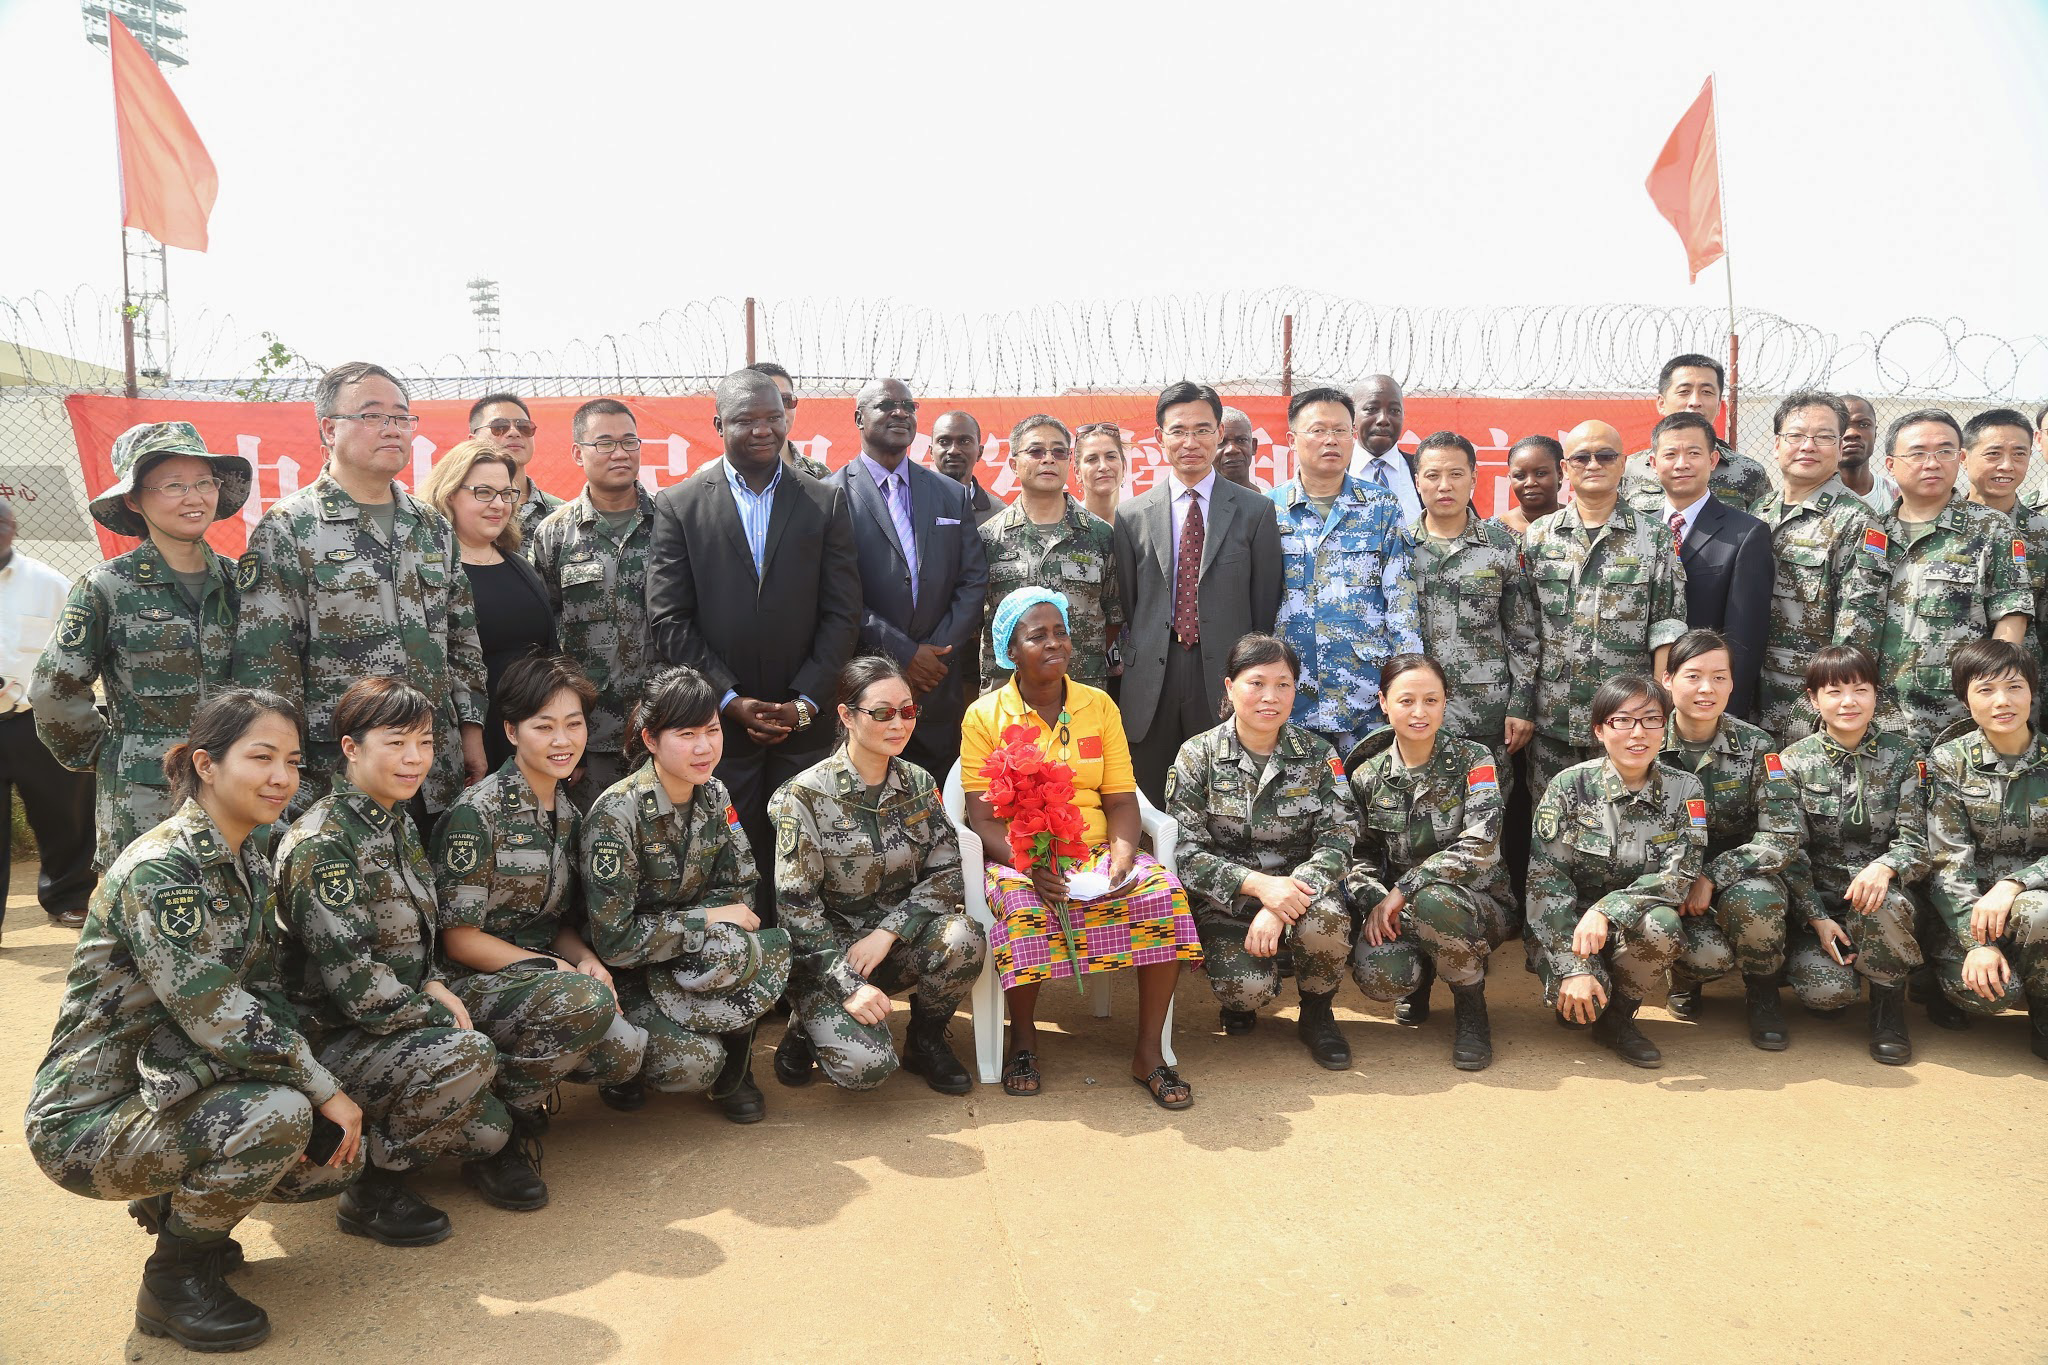 PHOTO: Beatrice Yardolo poses for a photo with Chinese soldiers and officials from the Liberian government, Chinese embassy, and WHO on the day of her release from the Chinese Ebola treatment unit in Monrovia, Liberia on March 5, 2015.